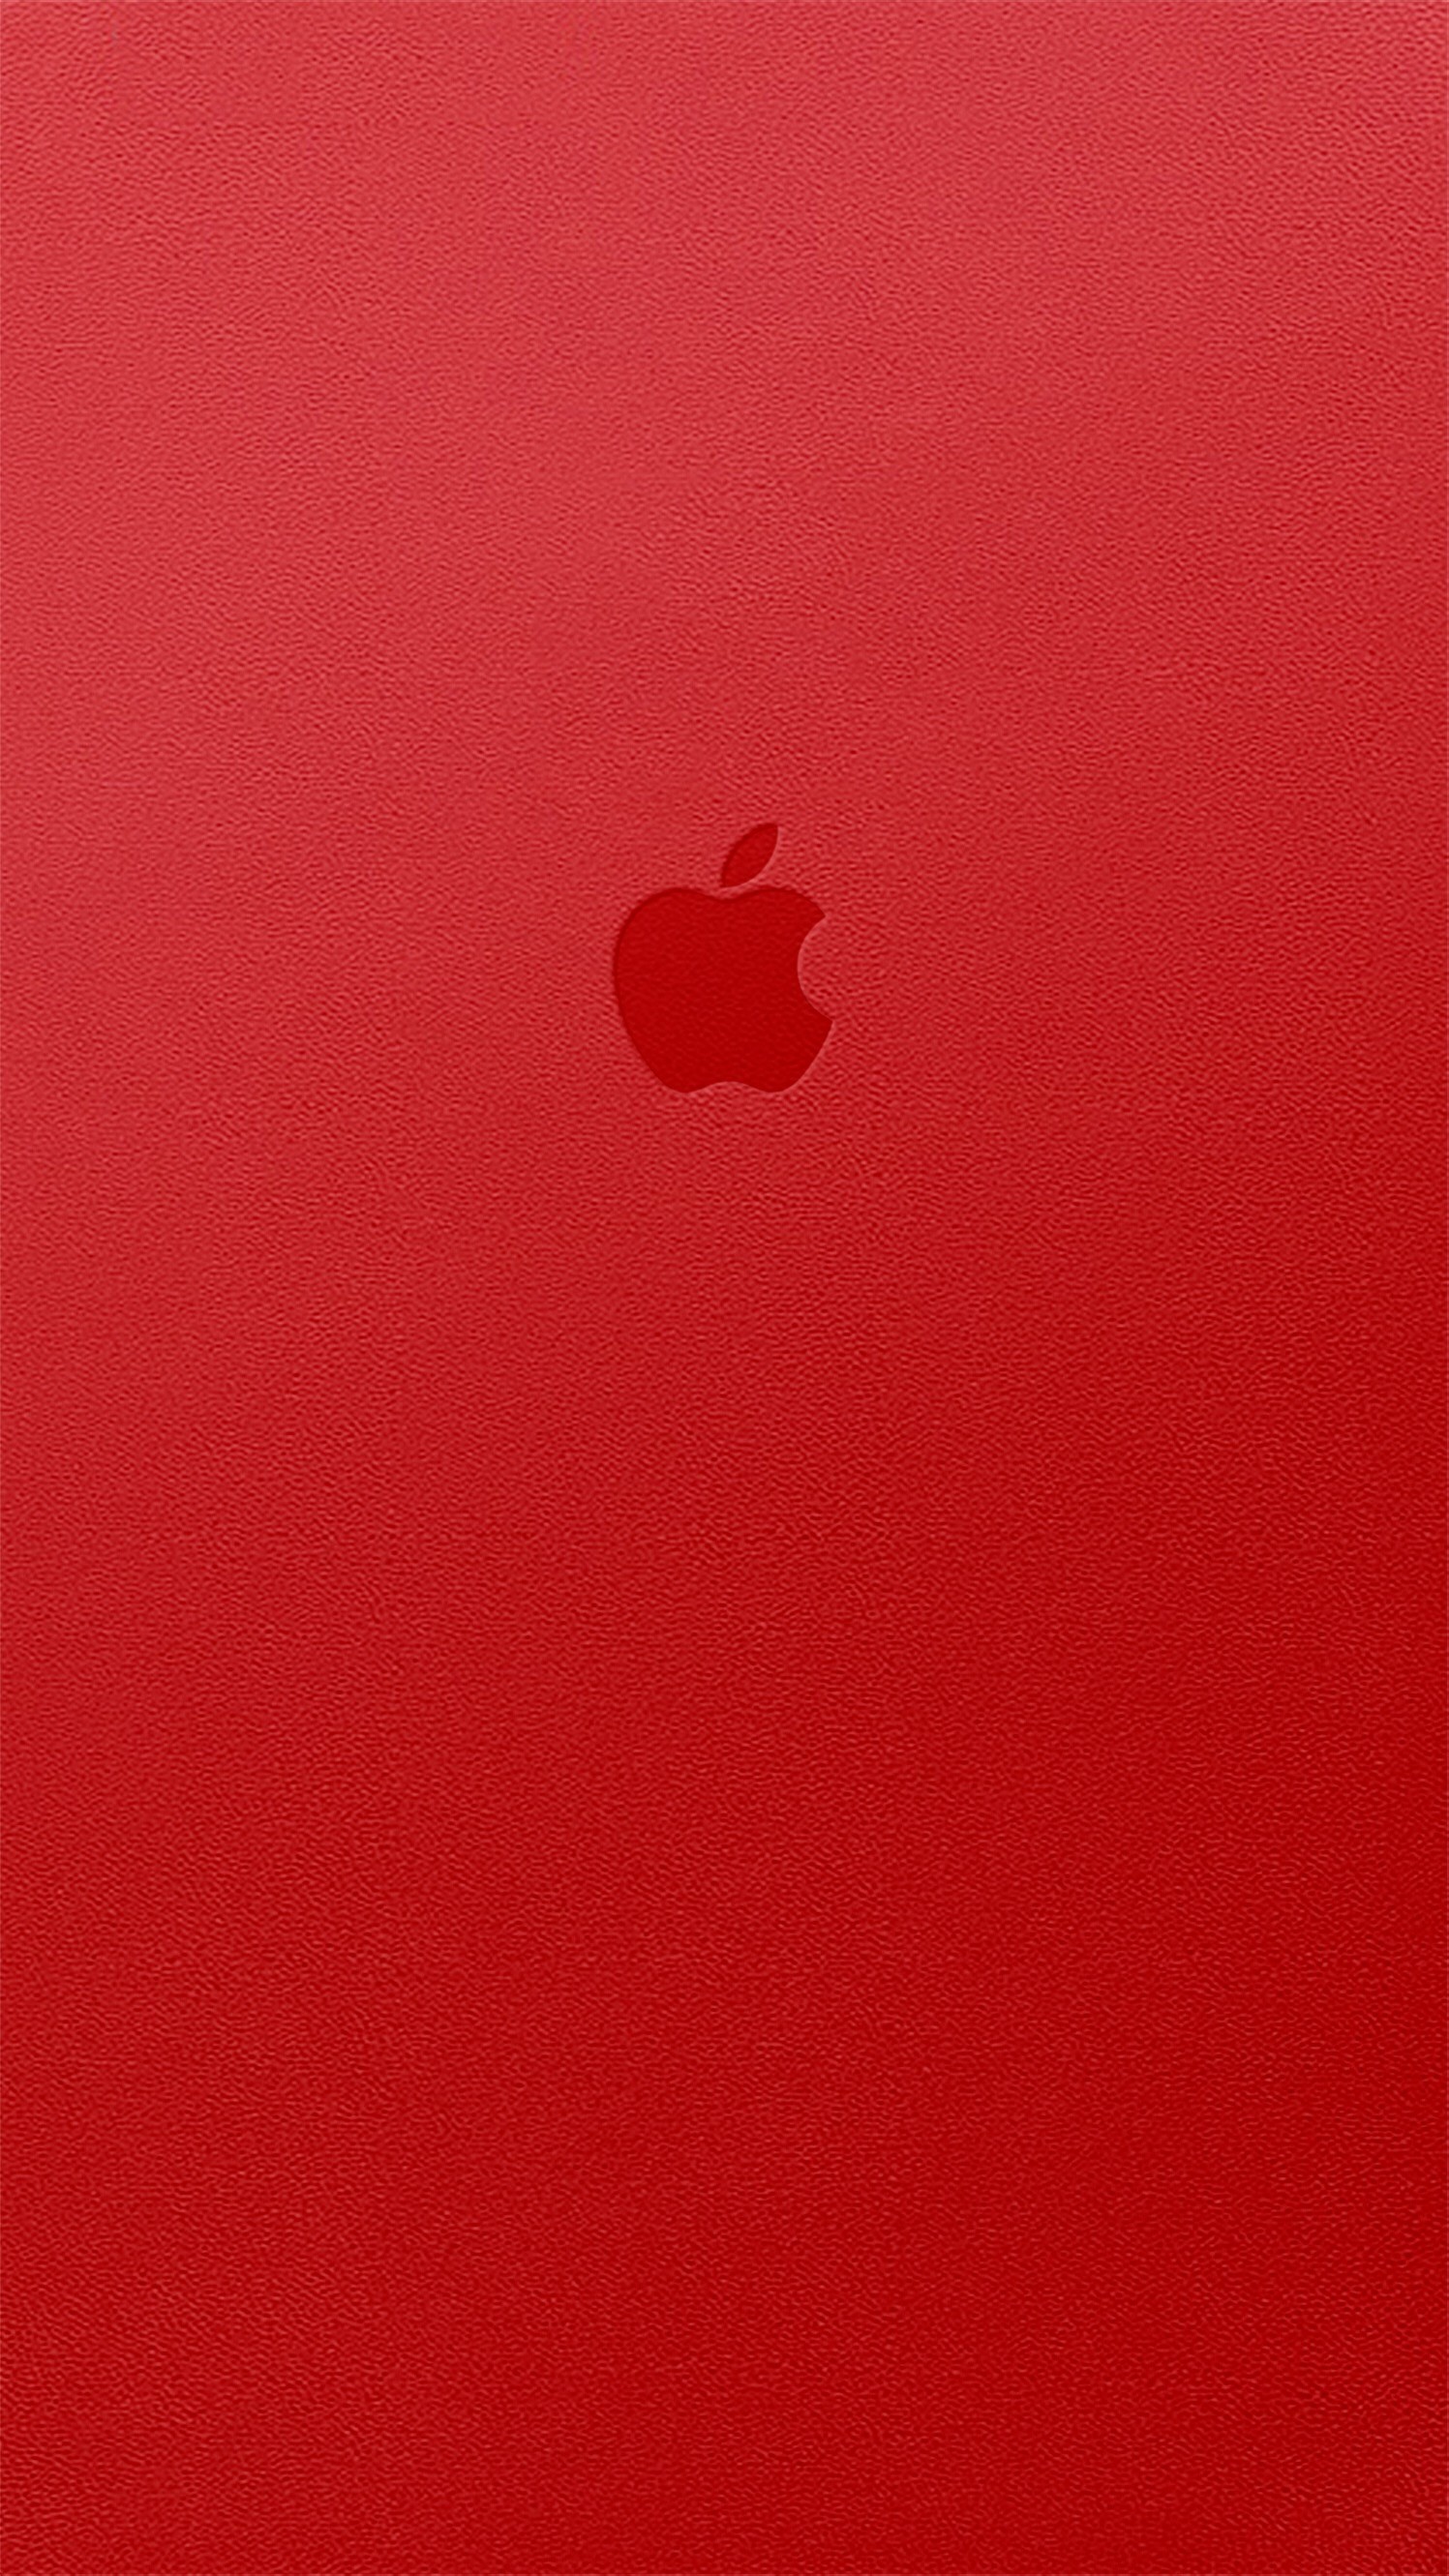 Red Iphone 8 Wallpapers